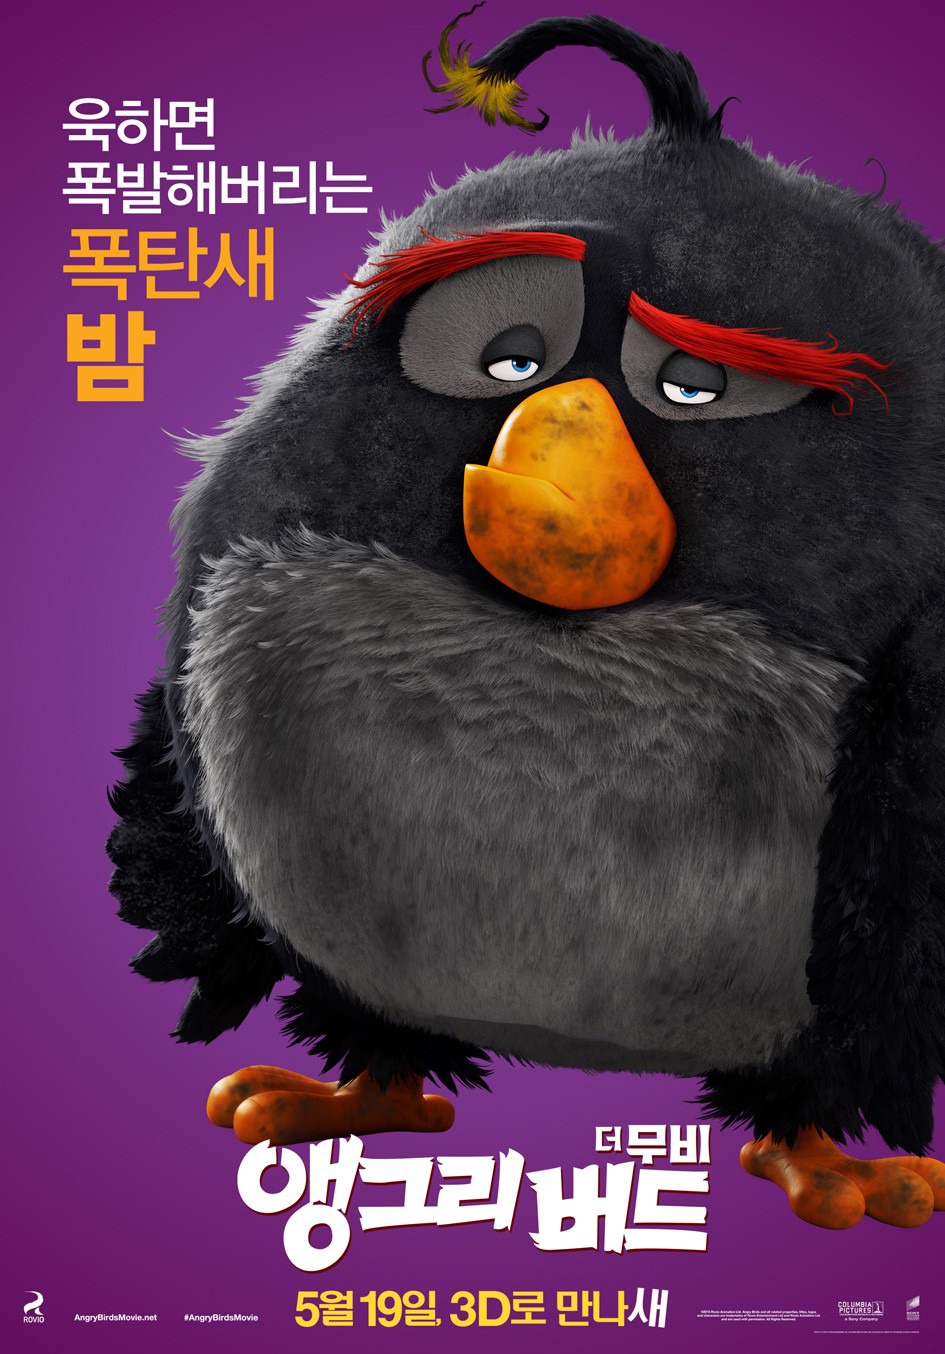 angry-birds-angry-birds-youloveit-ru